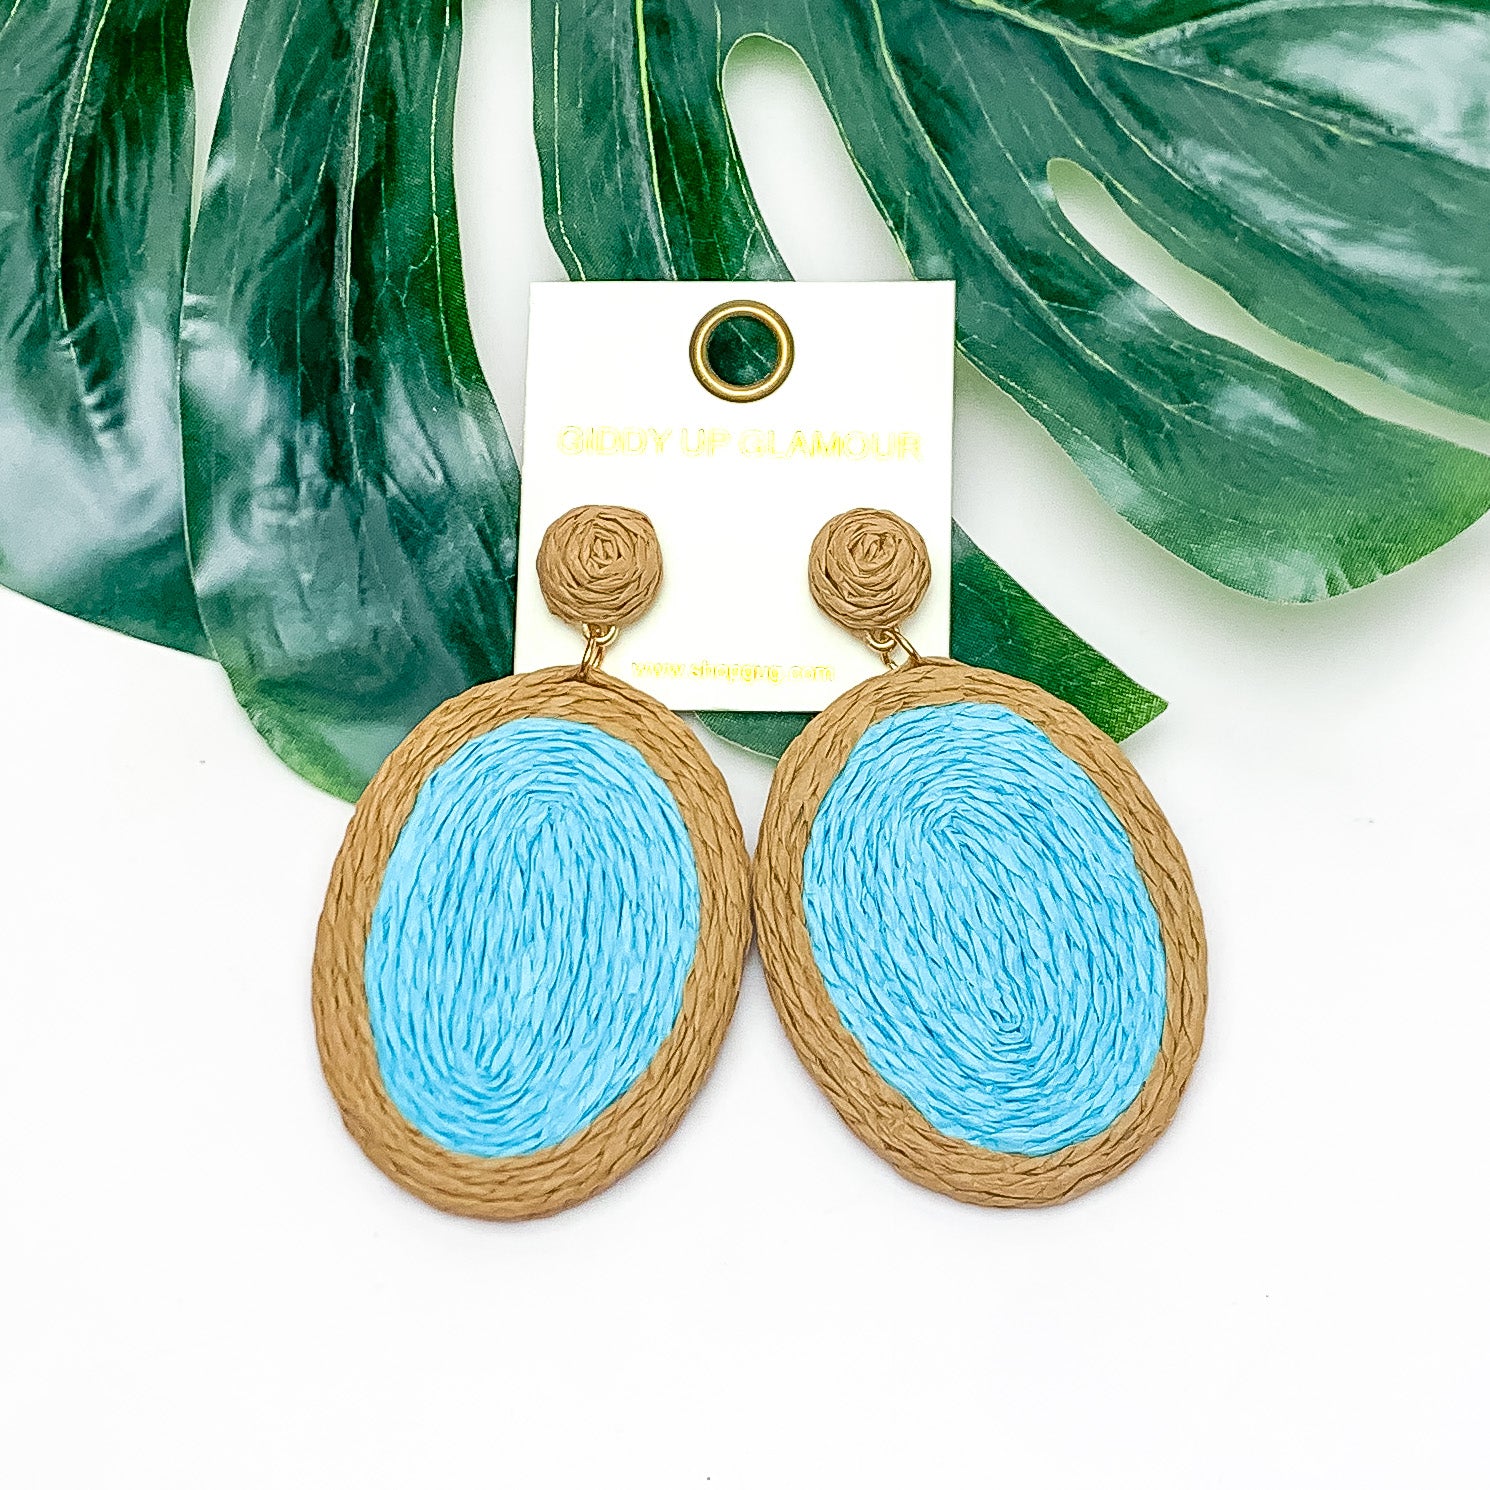 Brunch Bash Raffia Wrapped Oval Earrings in Light Blue. Pictured on a white background with a large leaf behind the earrings.